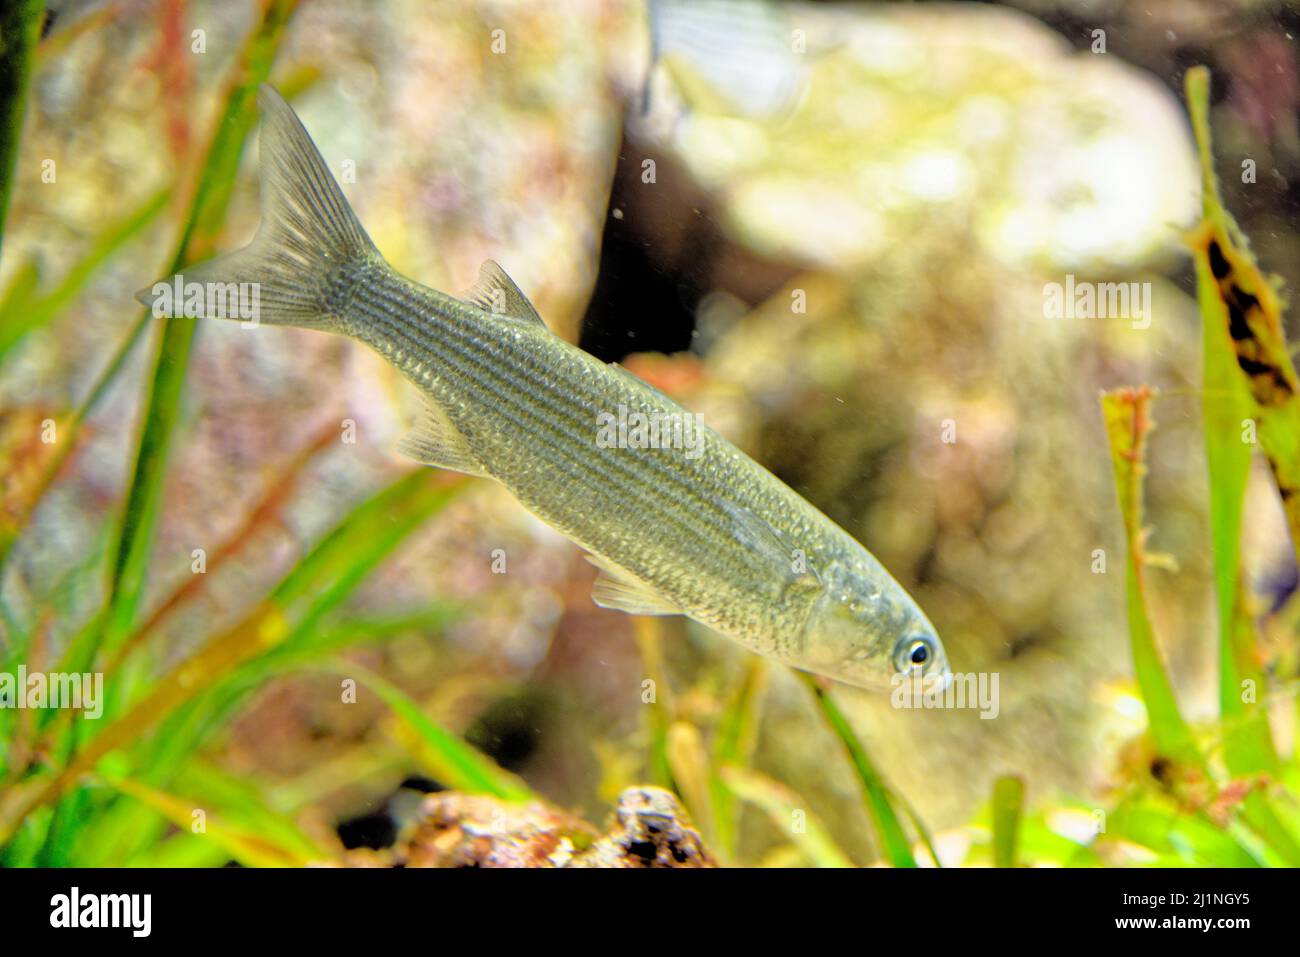 The leaping mullet (Chelon saliens) is a species of fish in the family Mugilidae. It is found in coastal waters and estuaries in the northeast Atlanti Stock Photo